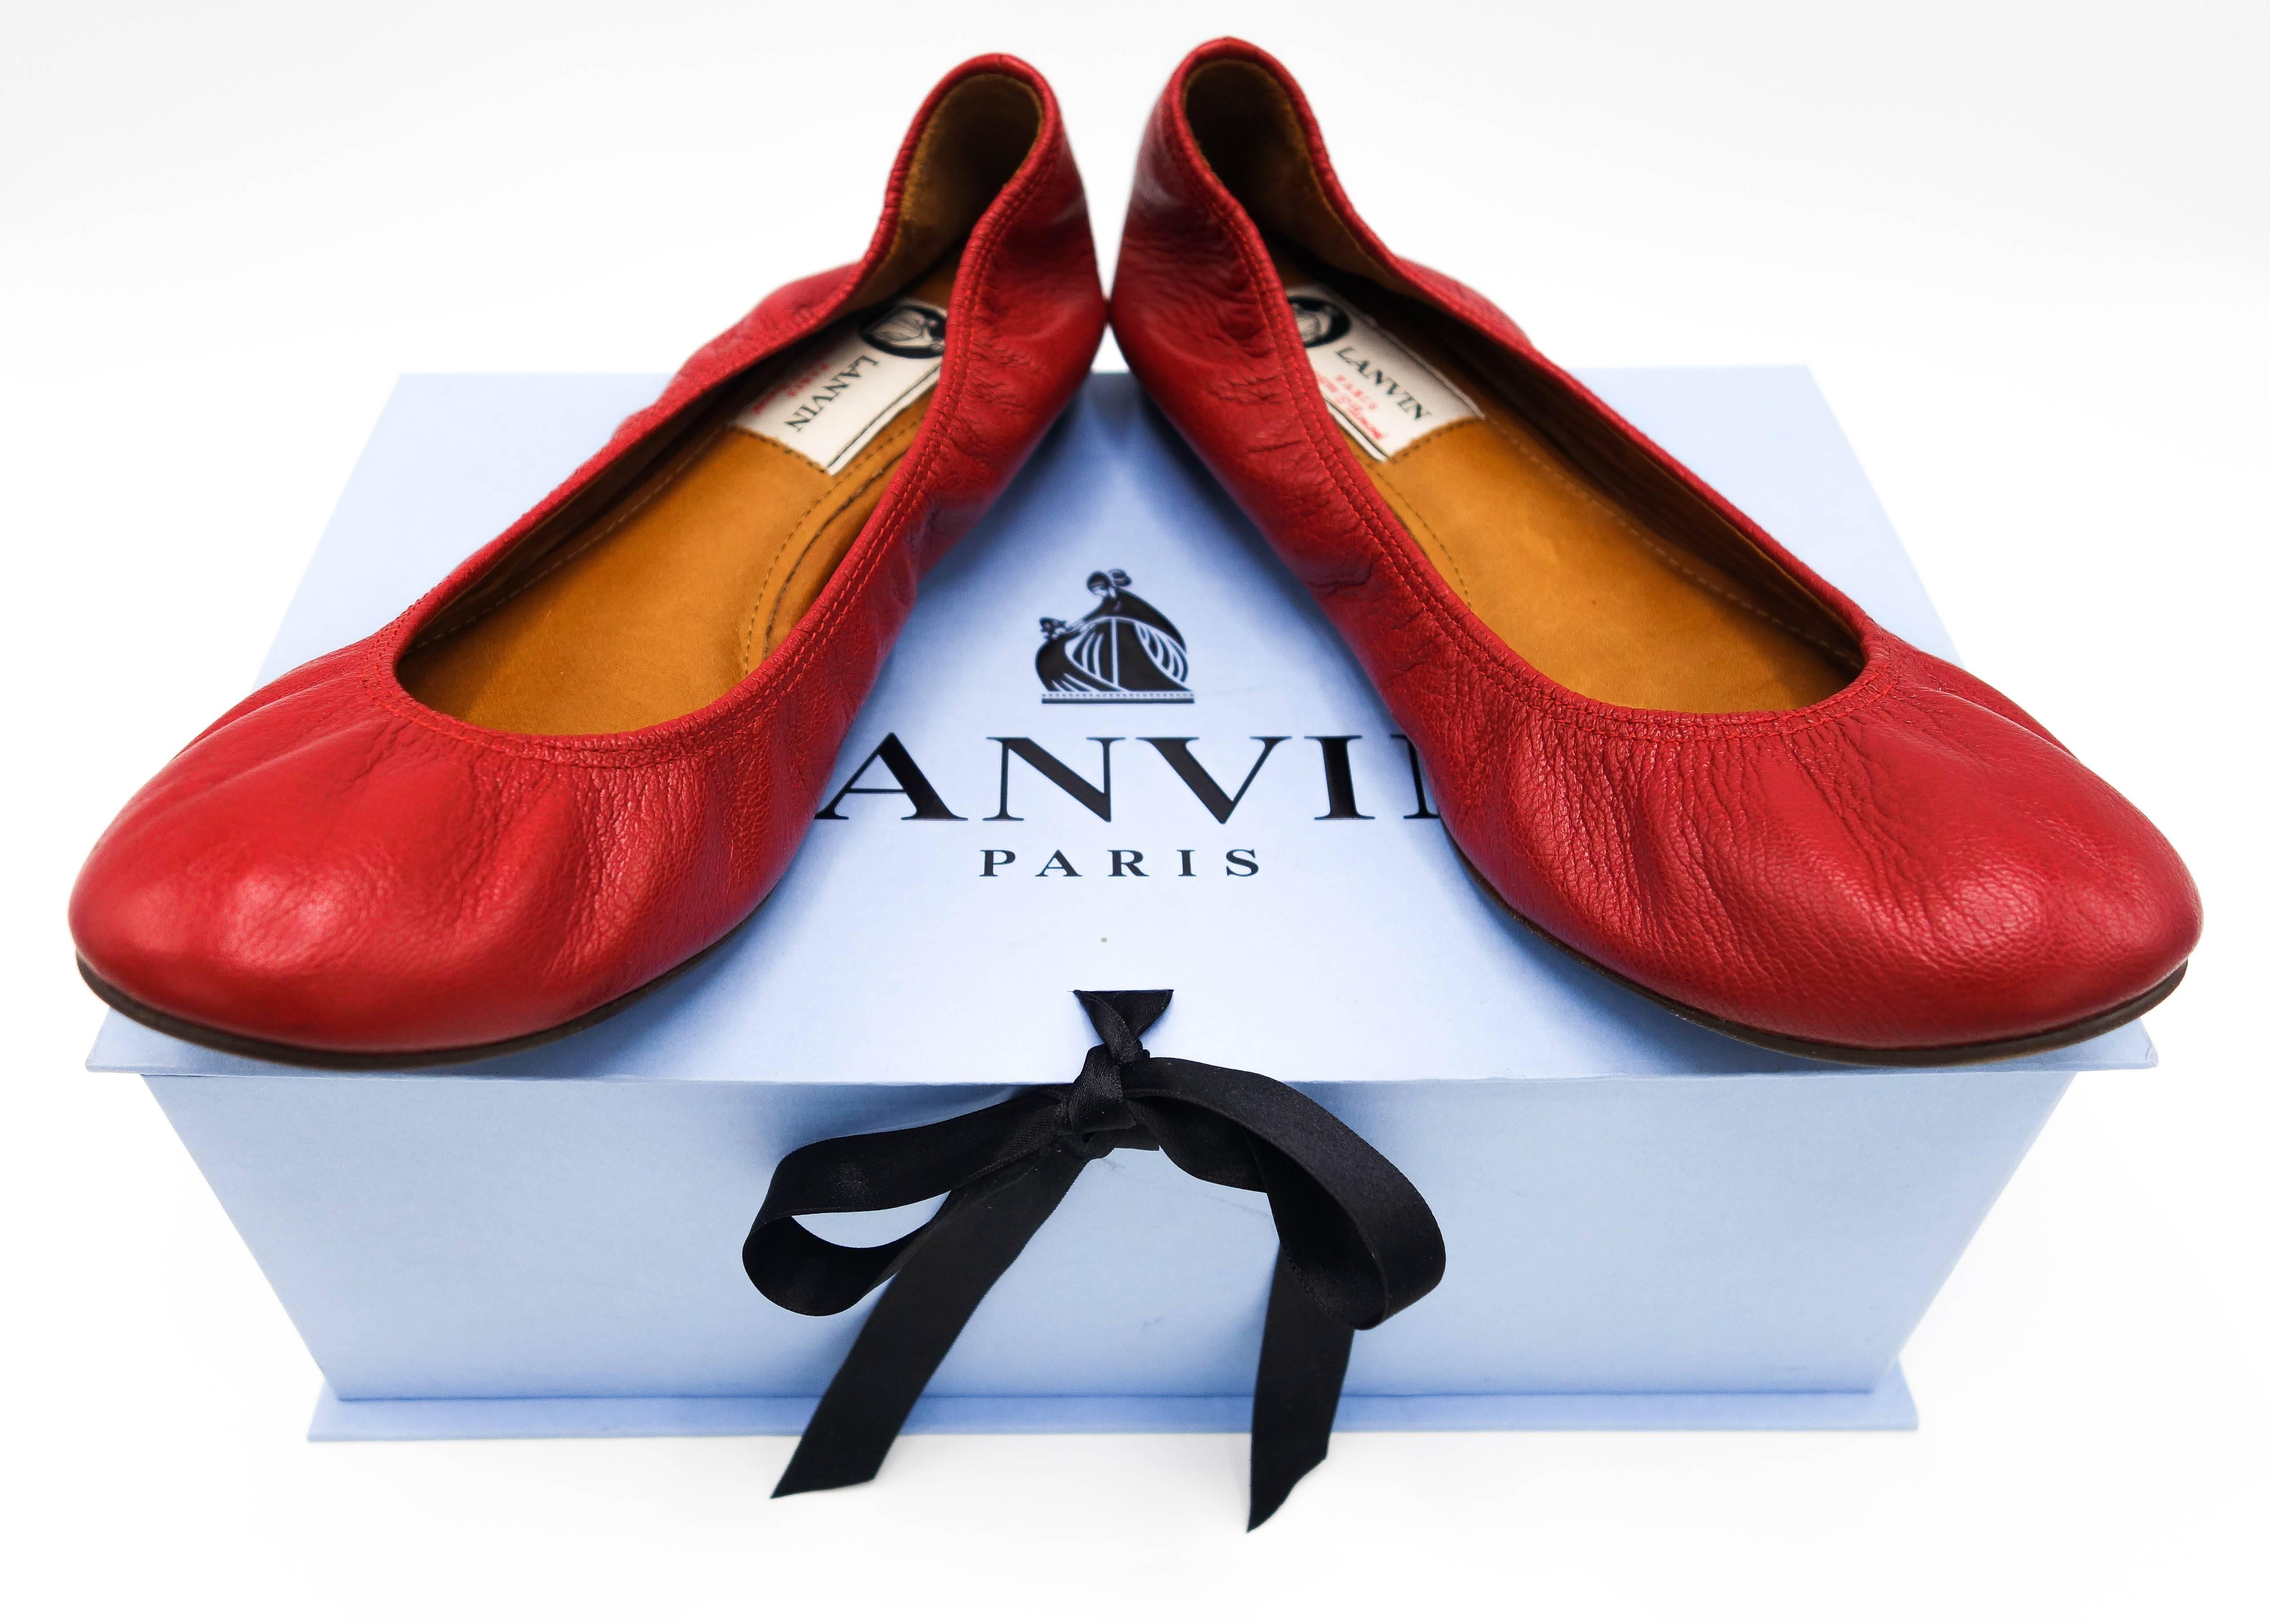 Never worn Lanvin Rouge Red Leather Goatskin Ballet Flats in size 37.5. 
This versatile pair has an elasticated trim and a concealed heel for subtle lift and support. Concealed wedge heel measures approximately 10mm/ 0.5 inches

Comes with original